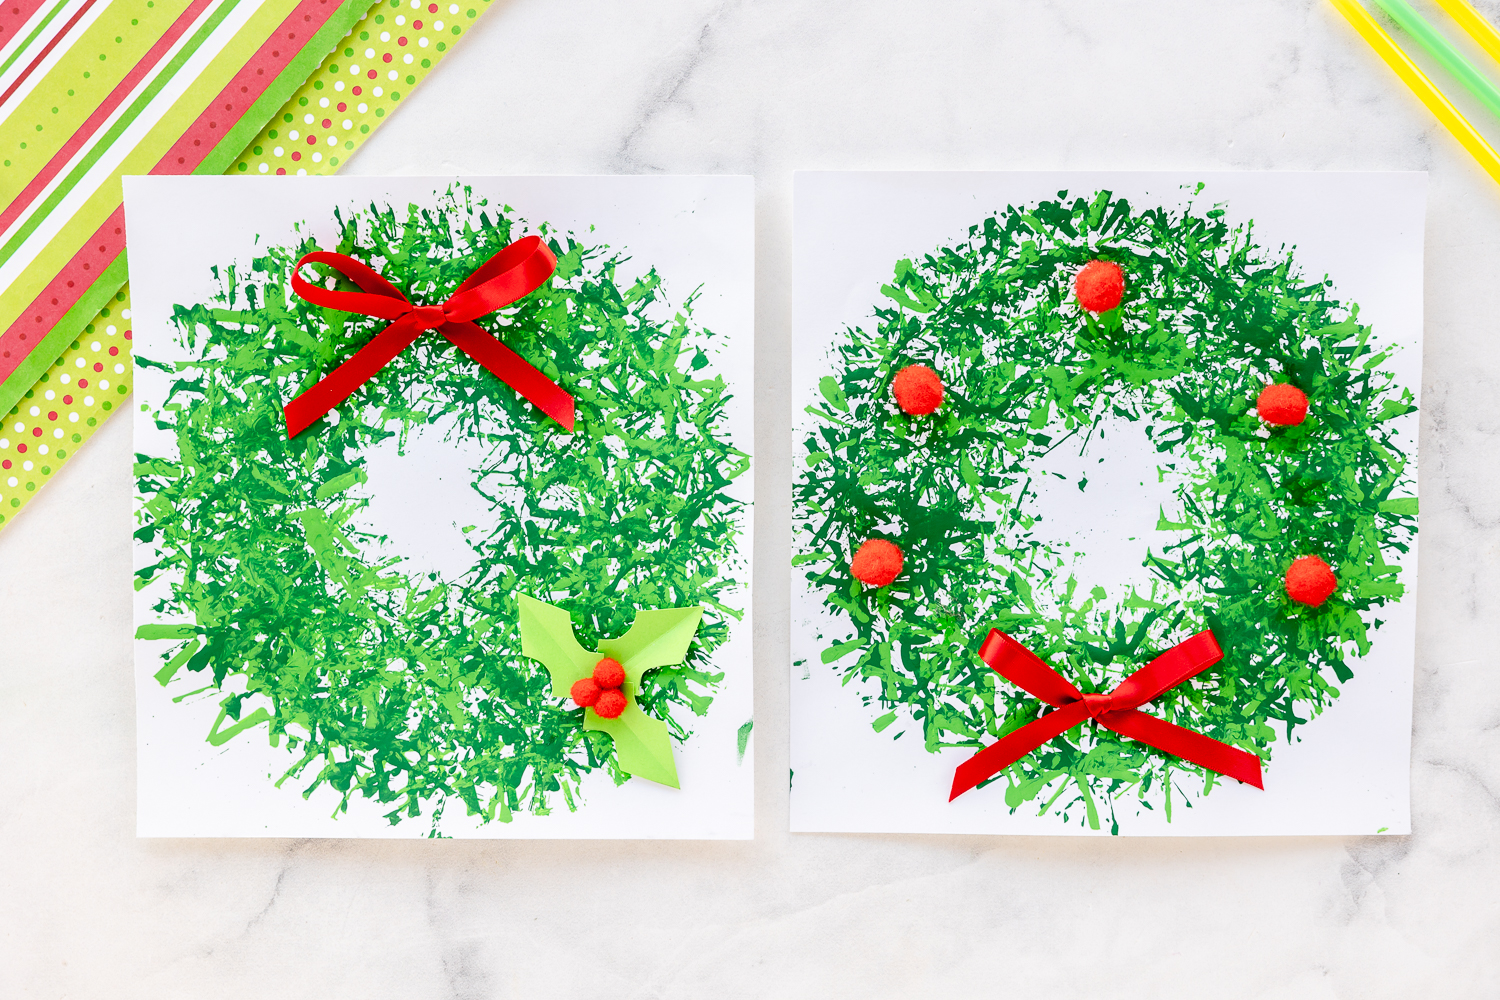 Easy Straw Flower Painting for Kids to Make - Projects with Kids